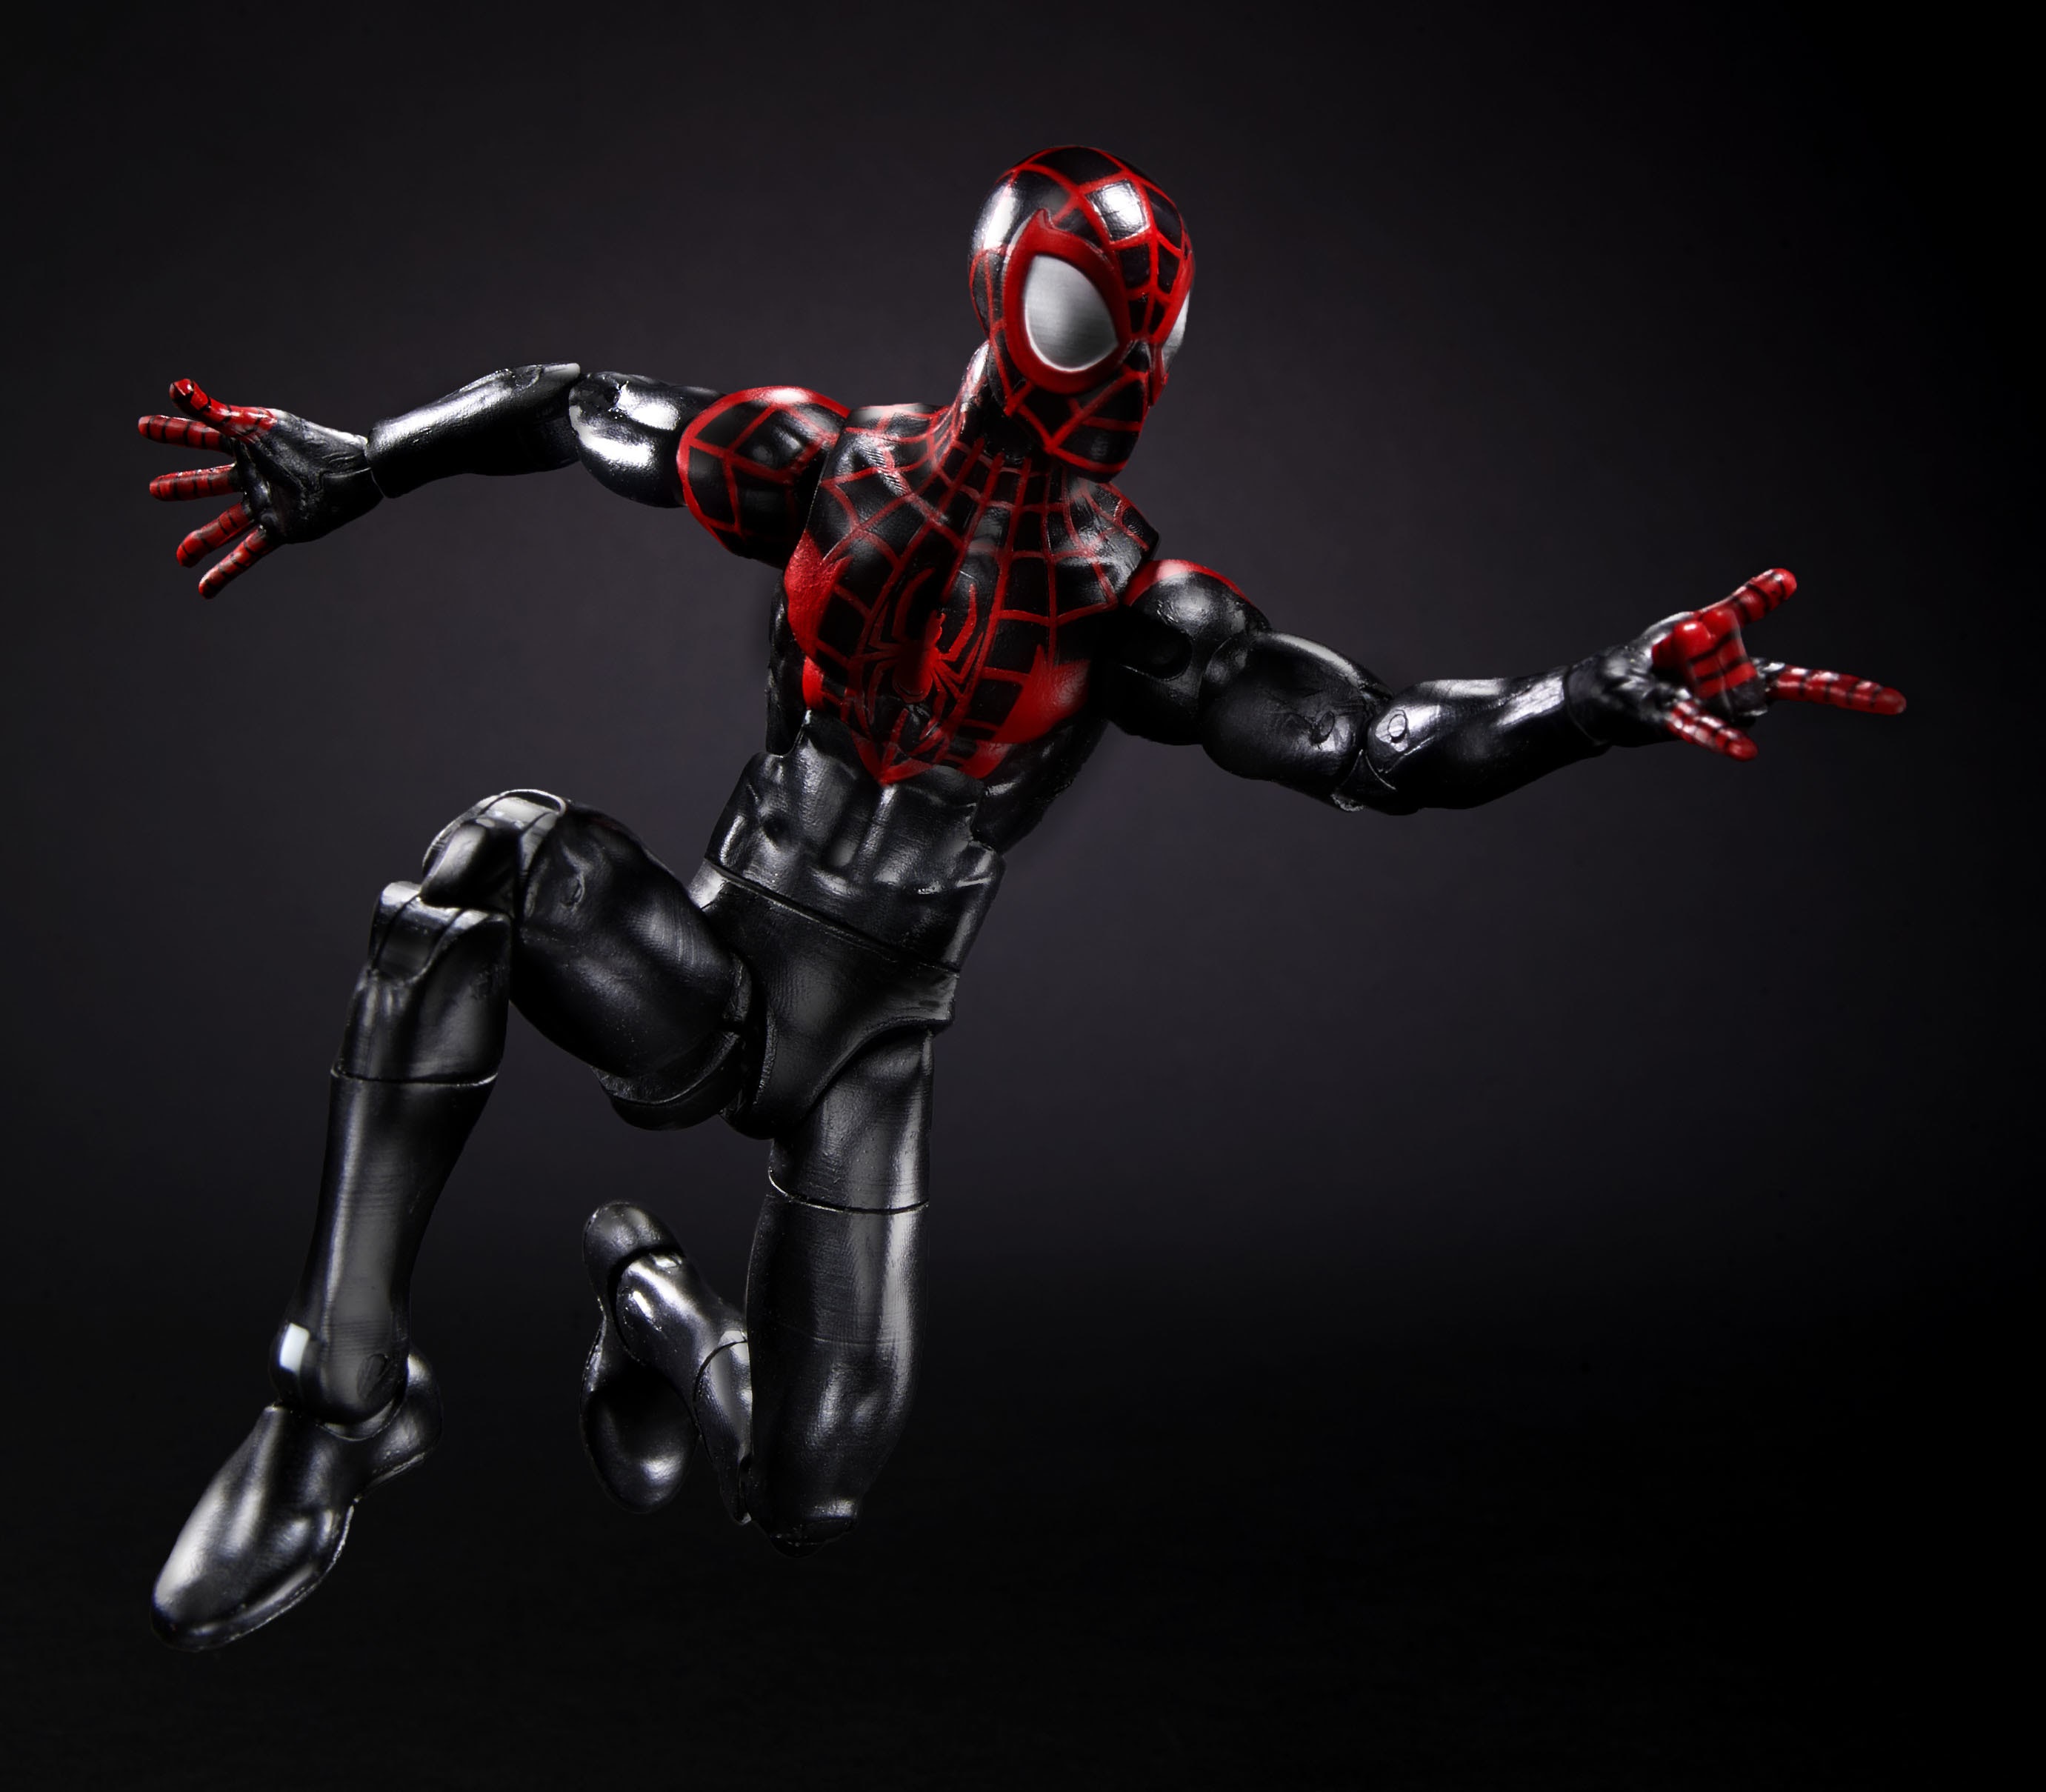 SpiderMan6inchUltimateSpiderManMilesMorales Large 300DPI Large Batch of Hasbro Marvel & Star Wars Figure Images From Toy Fair